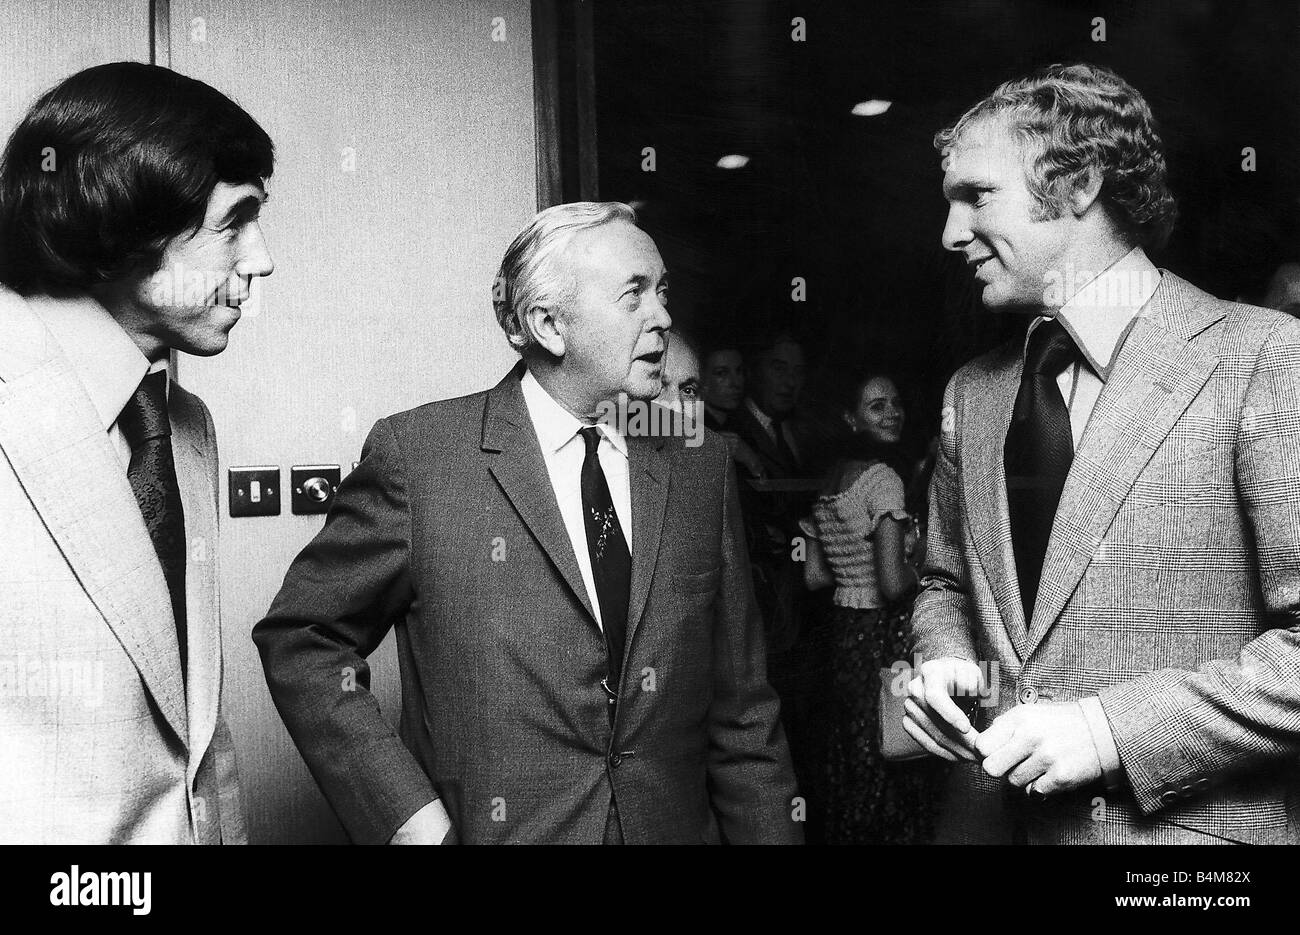 Harold Wilson Labour Prime Minister of Britain chats to Bobby Moore former captain of England football and Gordon Banks former England goalkeeper at an evening held in their honour at the Sportsman Club Tottenham Court Road Stock Photo